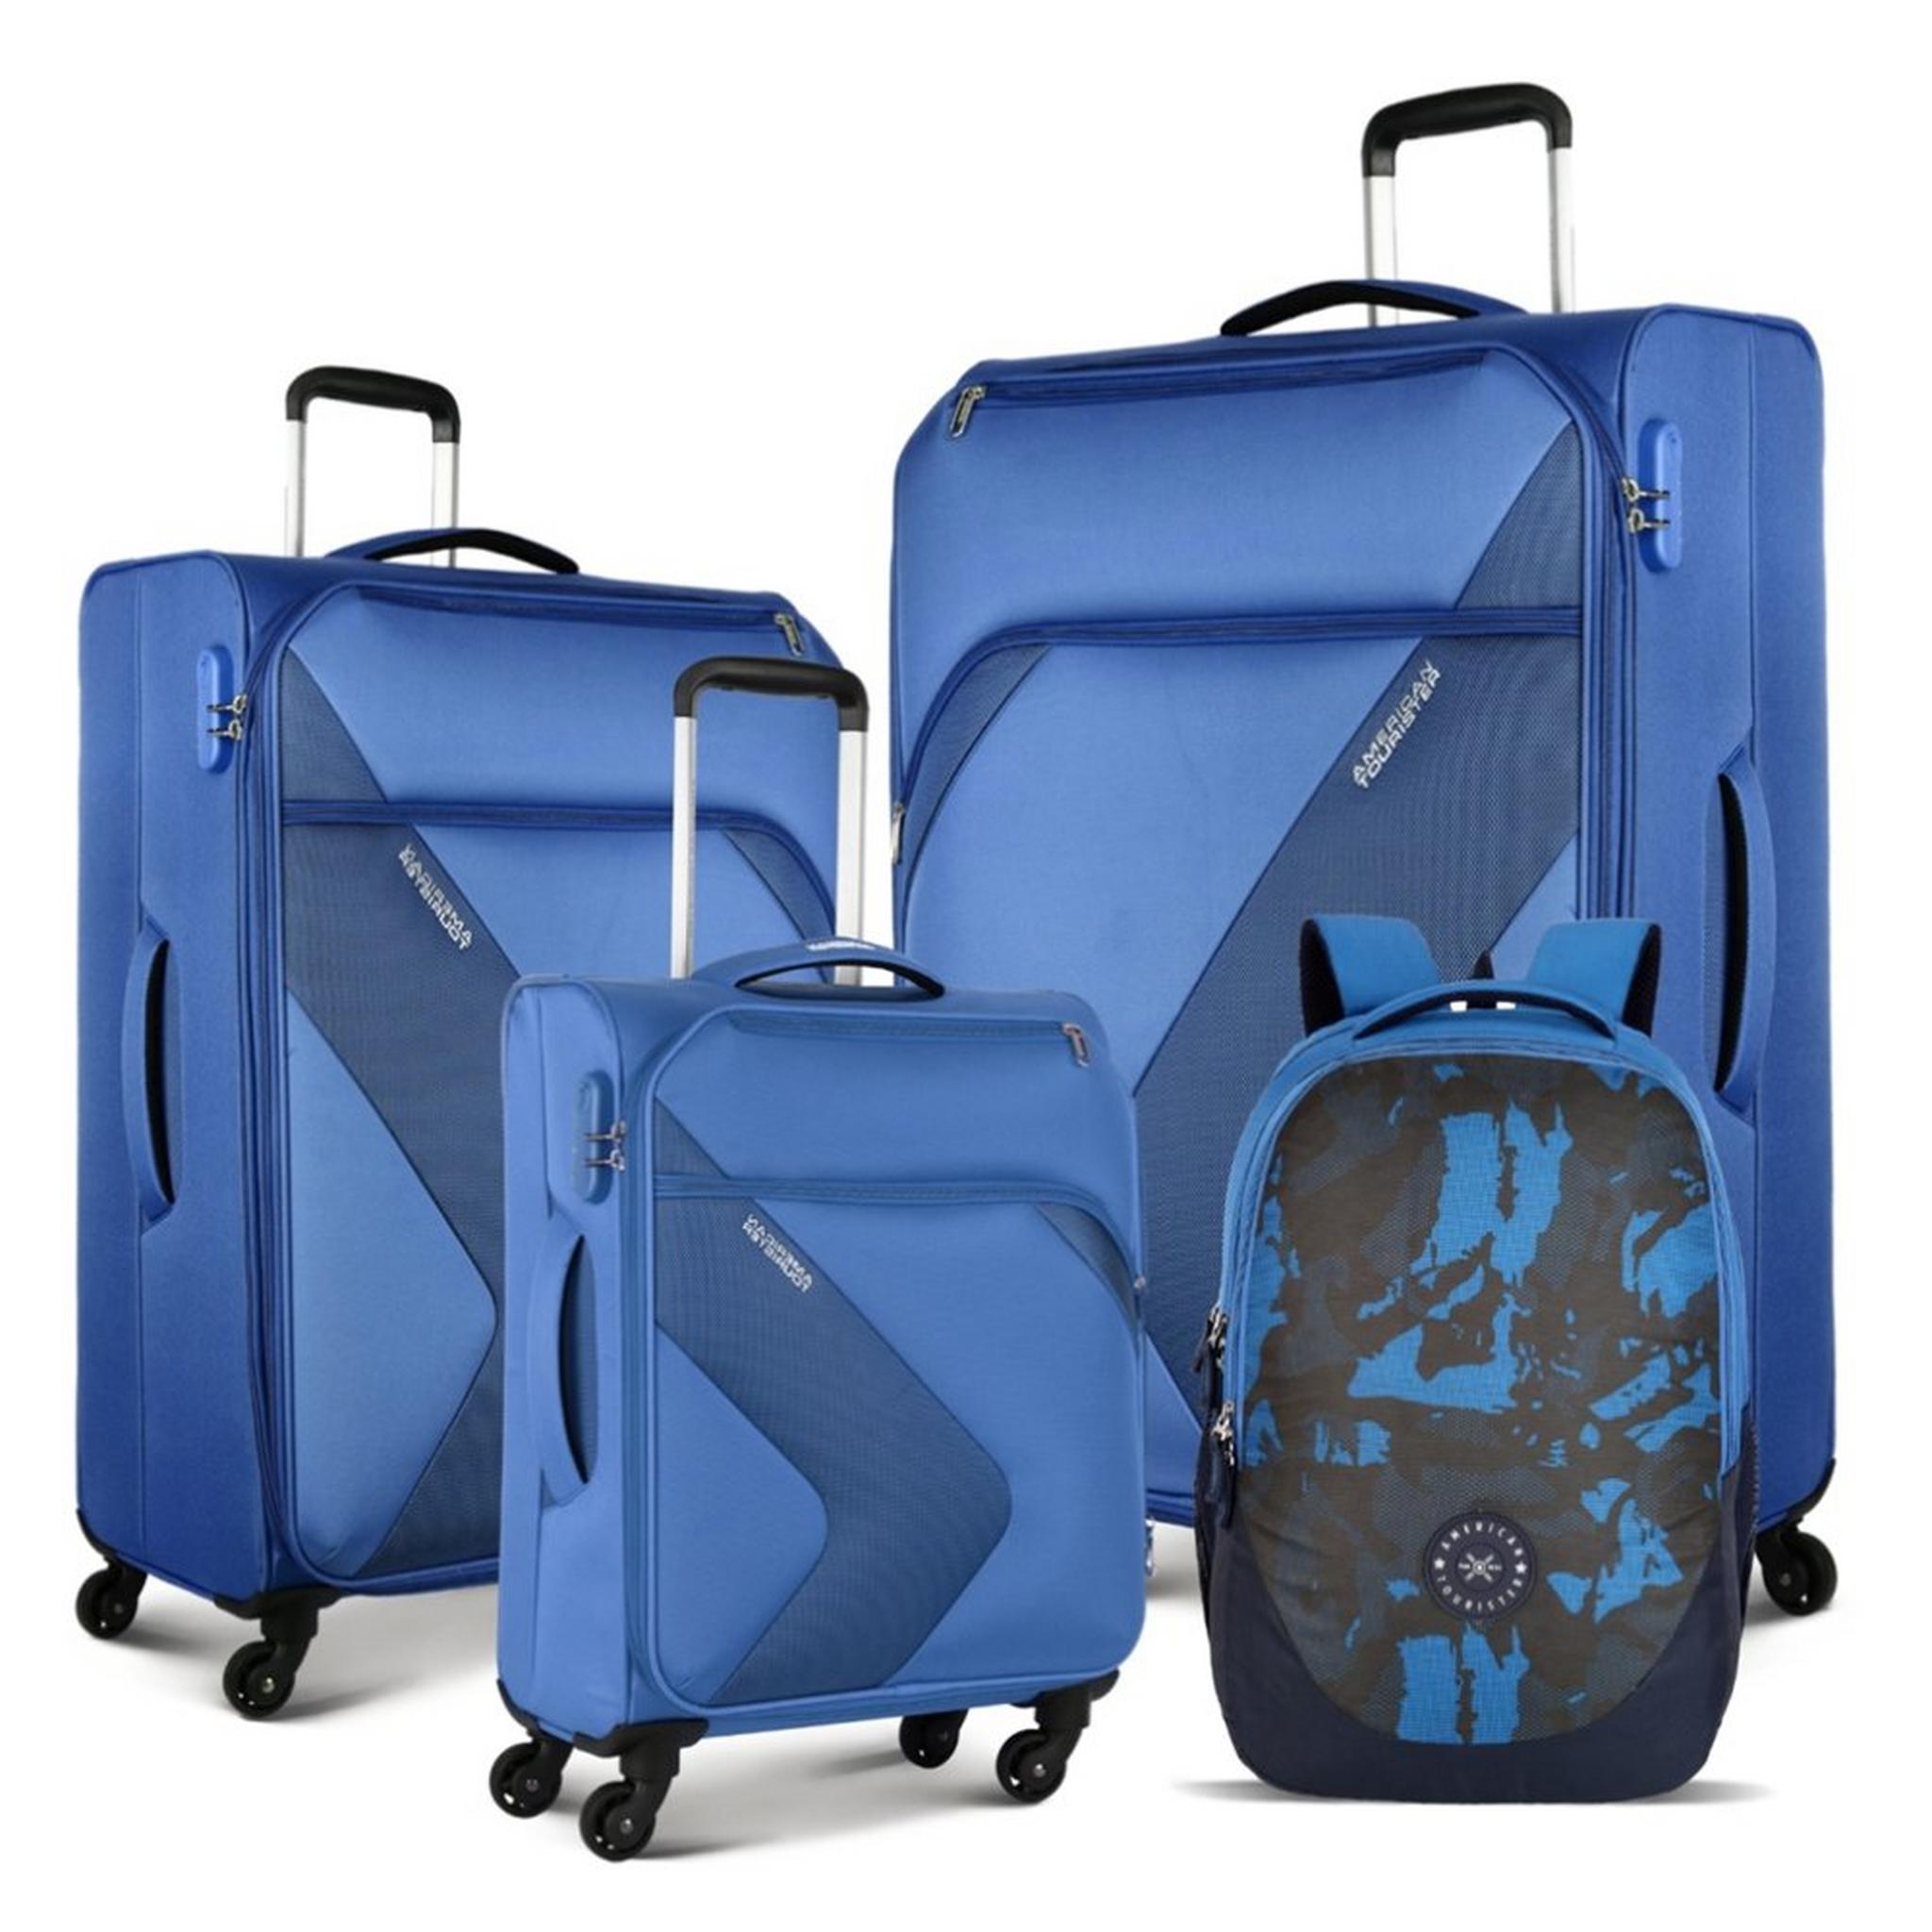 American Tourister Stanfordd Luggage Set + Backpack - Navy